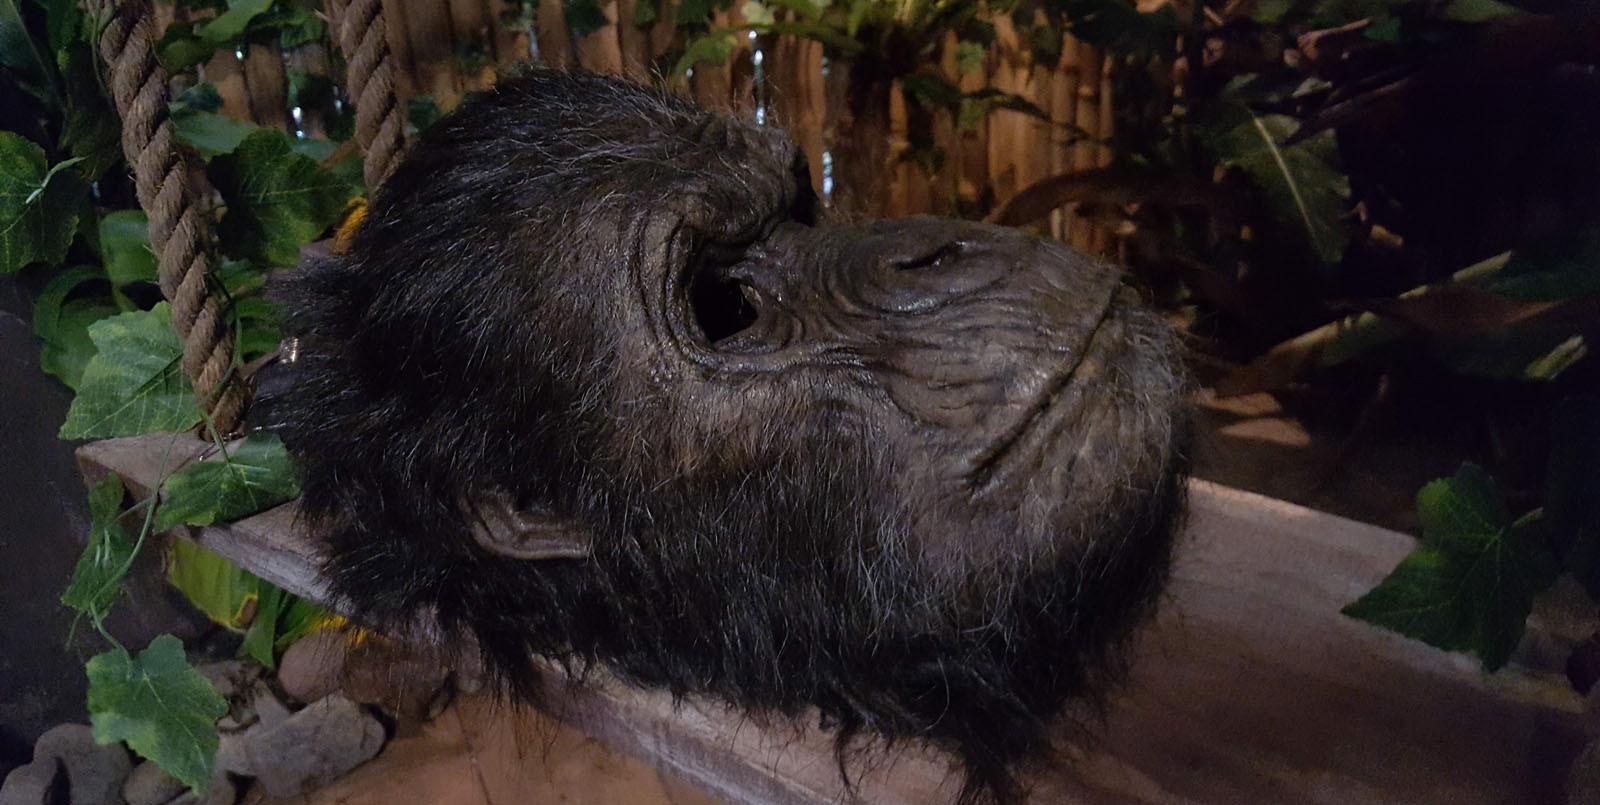 A close up of the head of the gorilla costume